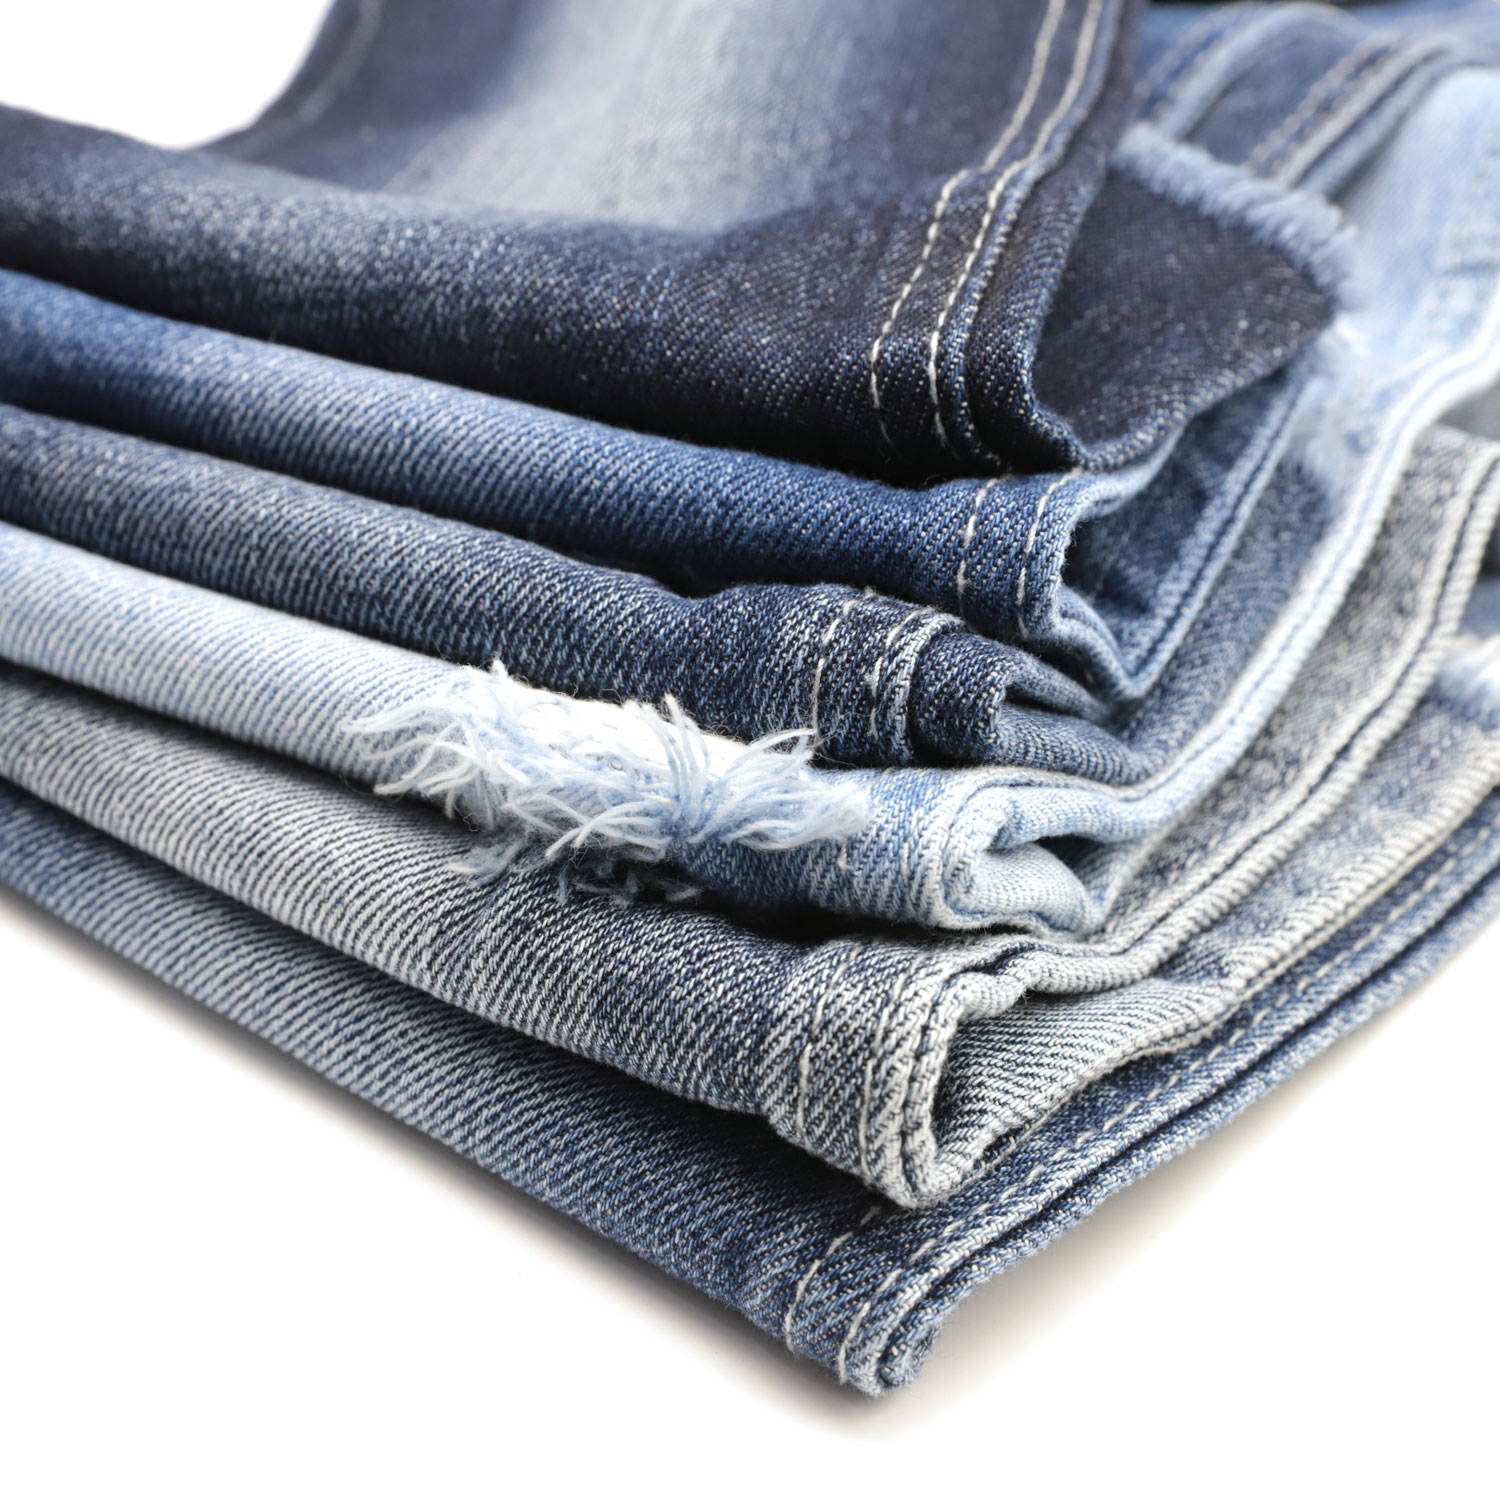 Why You Should Have a Denim Jeans Material? 1